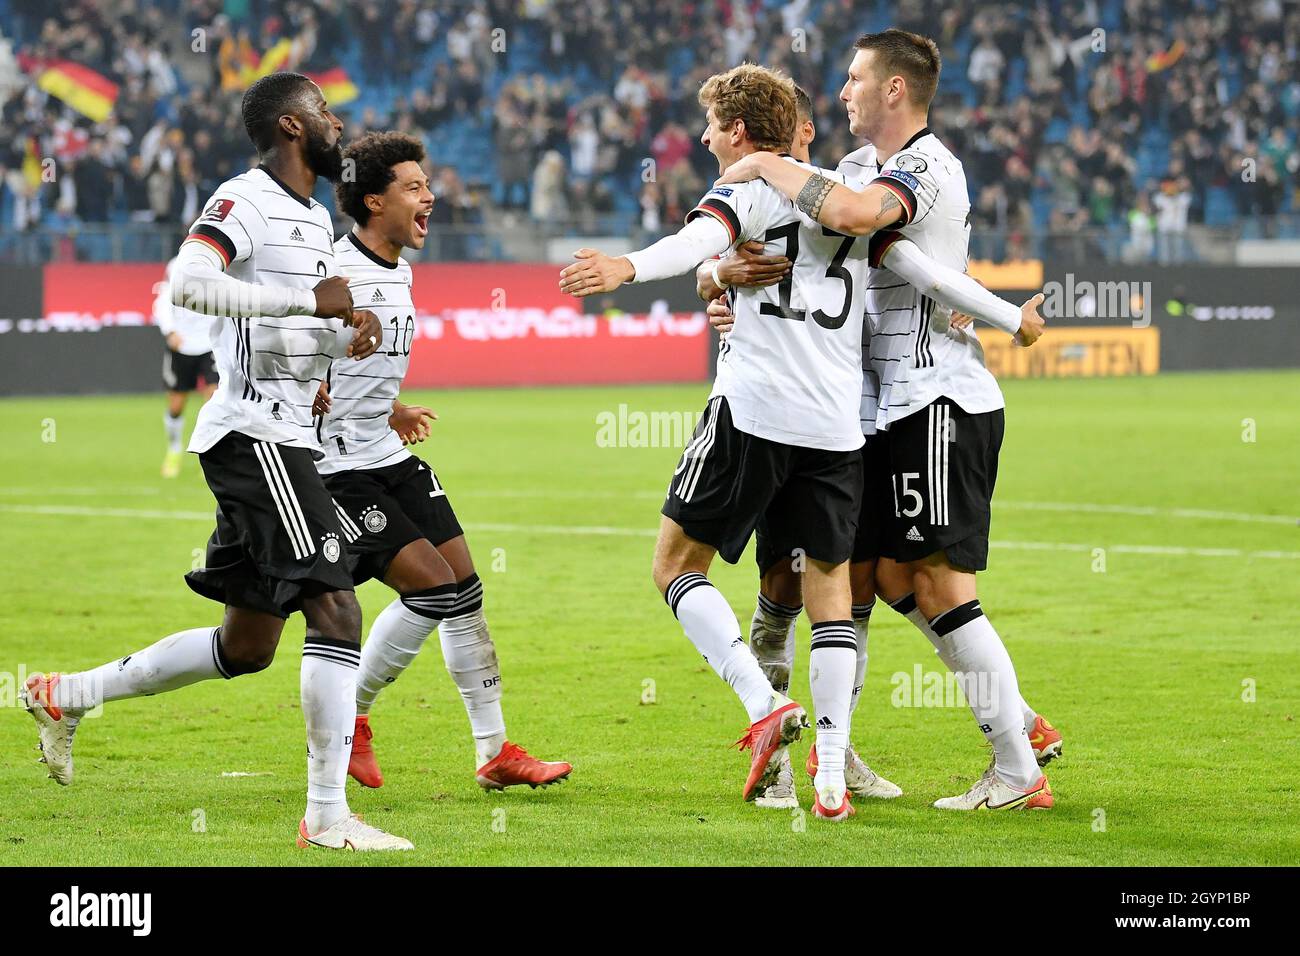 Hamuburg Germany 8th Oct 21 Thomas Mueller 3rd L Of Germany Celebrates Scoring With Teammates During The Fifa World Cup Qatar 22 European Qualifiers Group J Football Match Between Germany And Romania